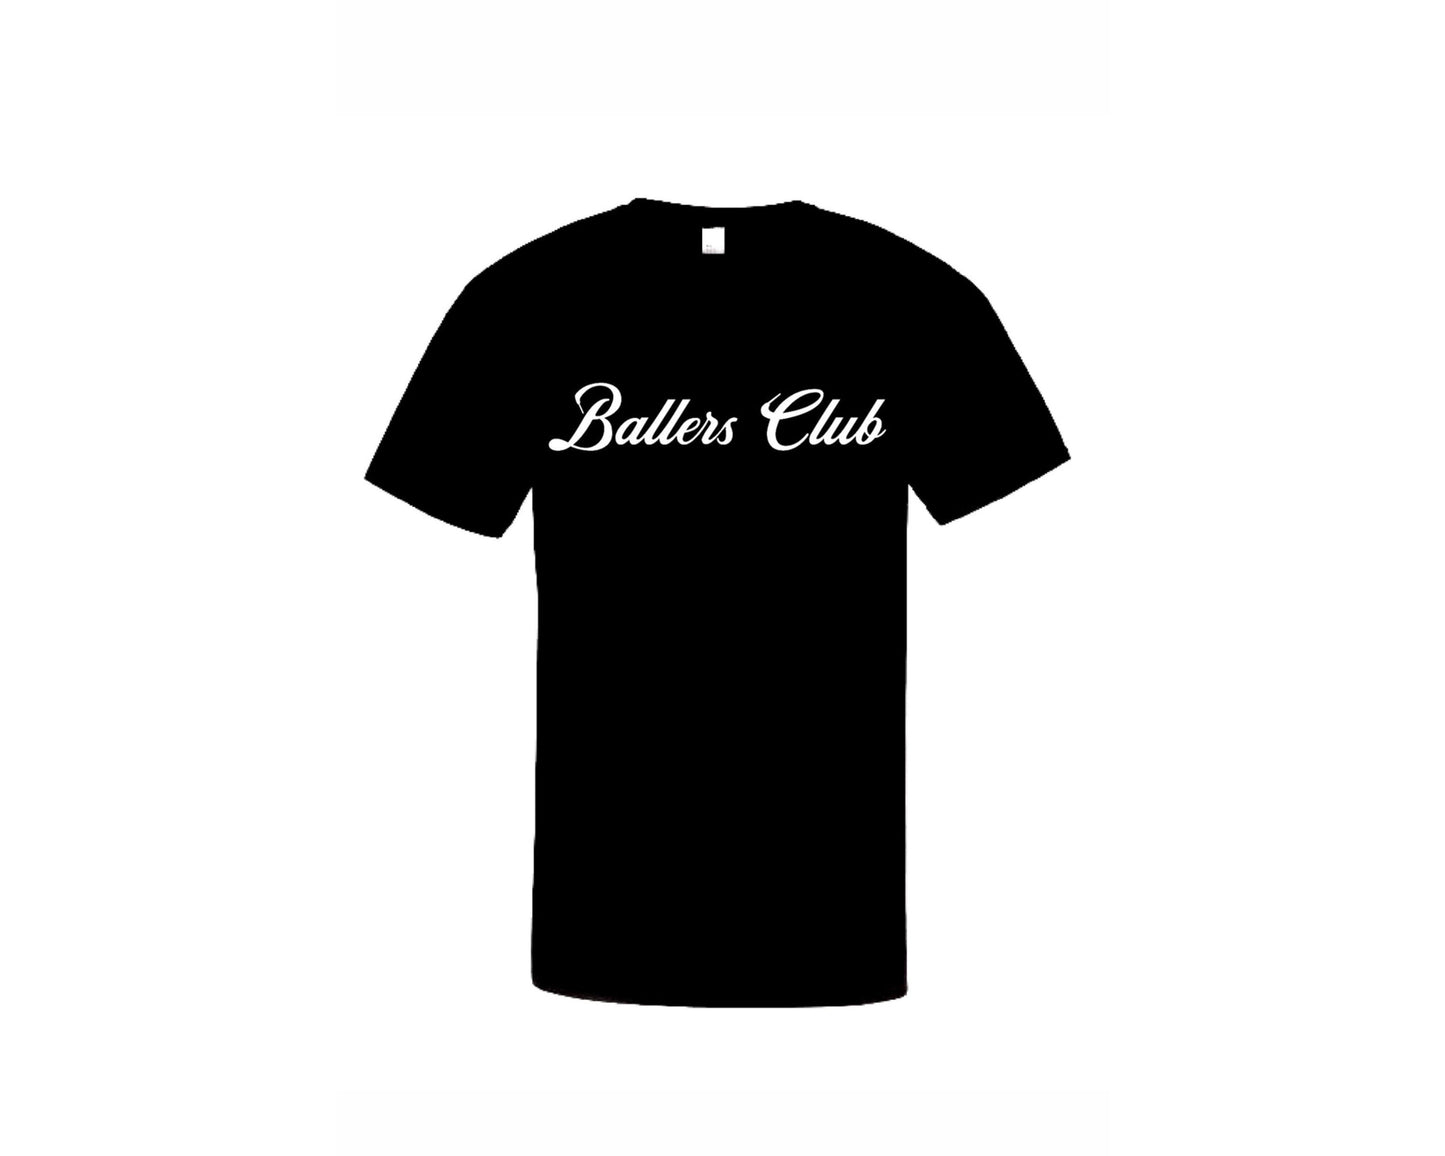 Exclusive Ballers Club T-Shirt - Image 02 - Only at www.BallersClubKickz.com - This is an Exclusive Ballers Club premium T-Shirt made with premium 100% Cotton.